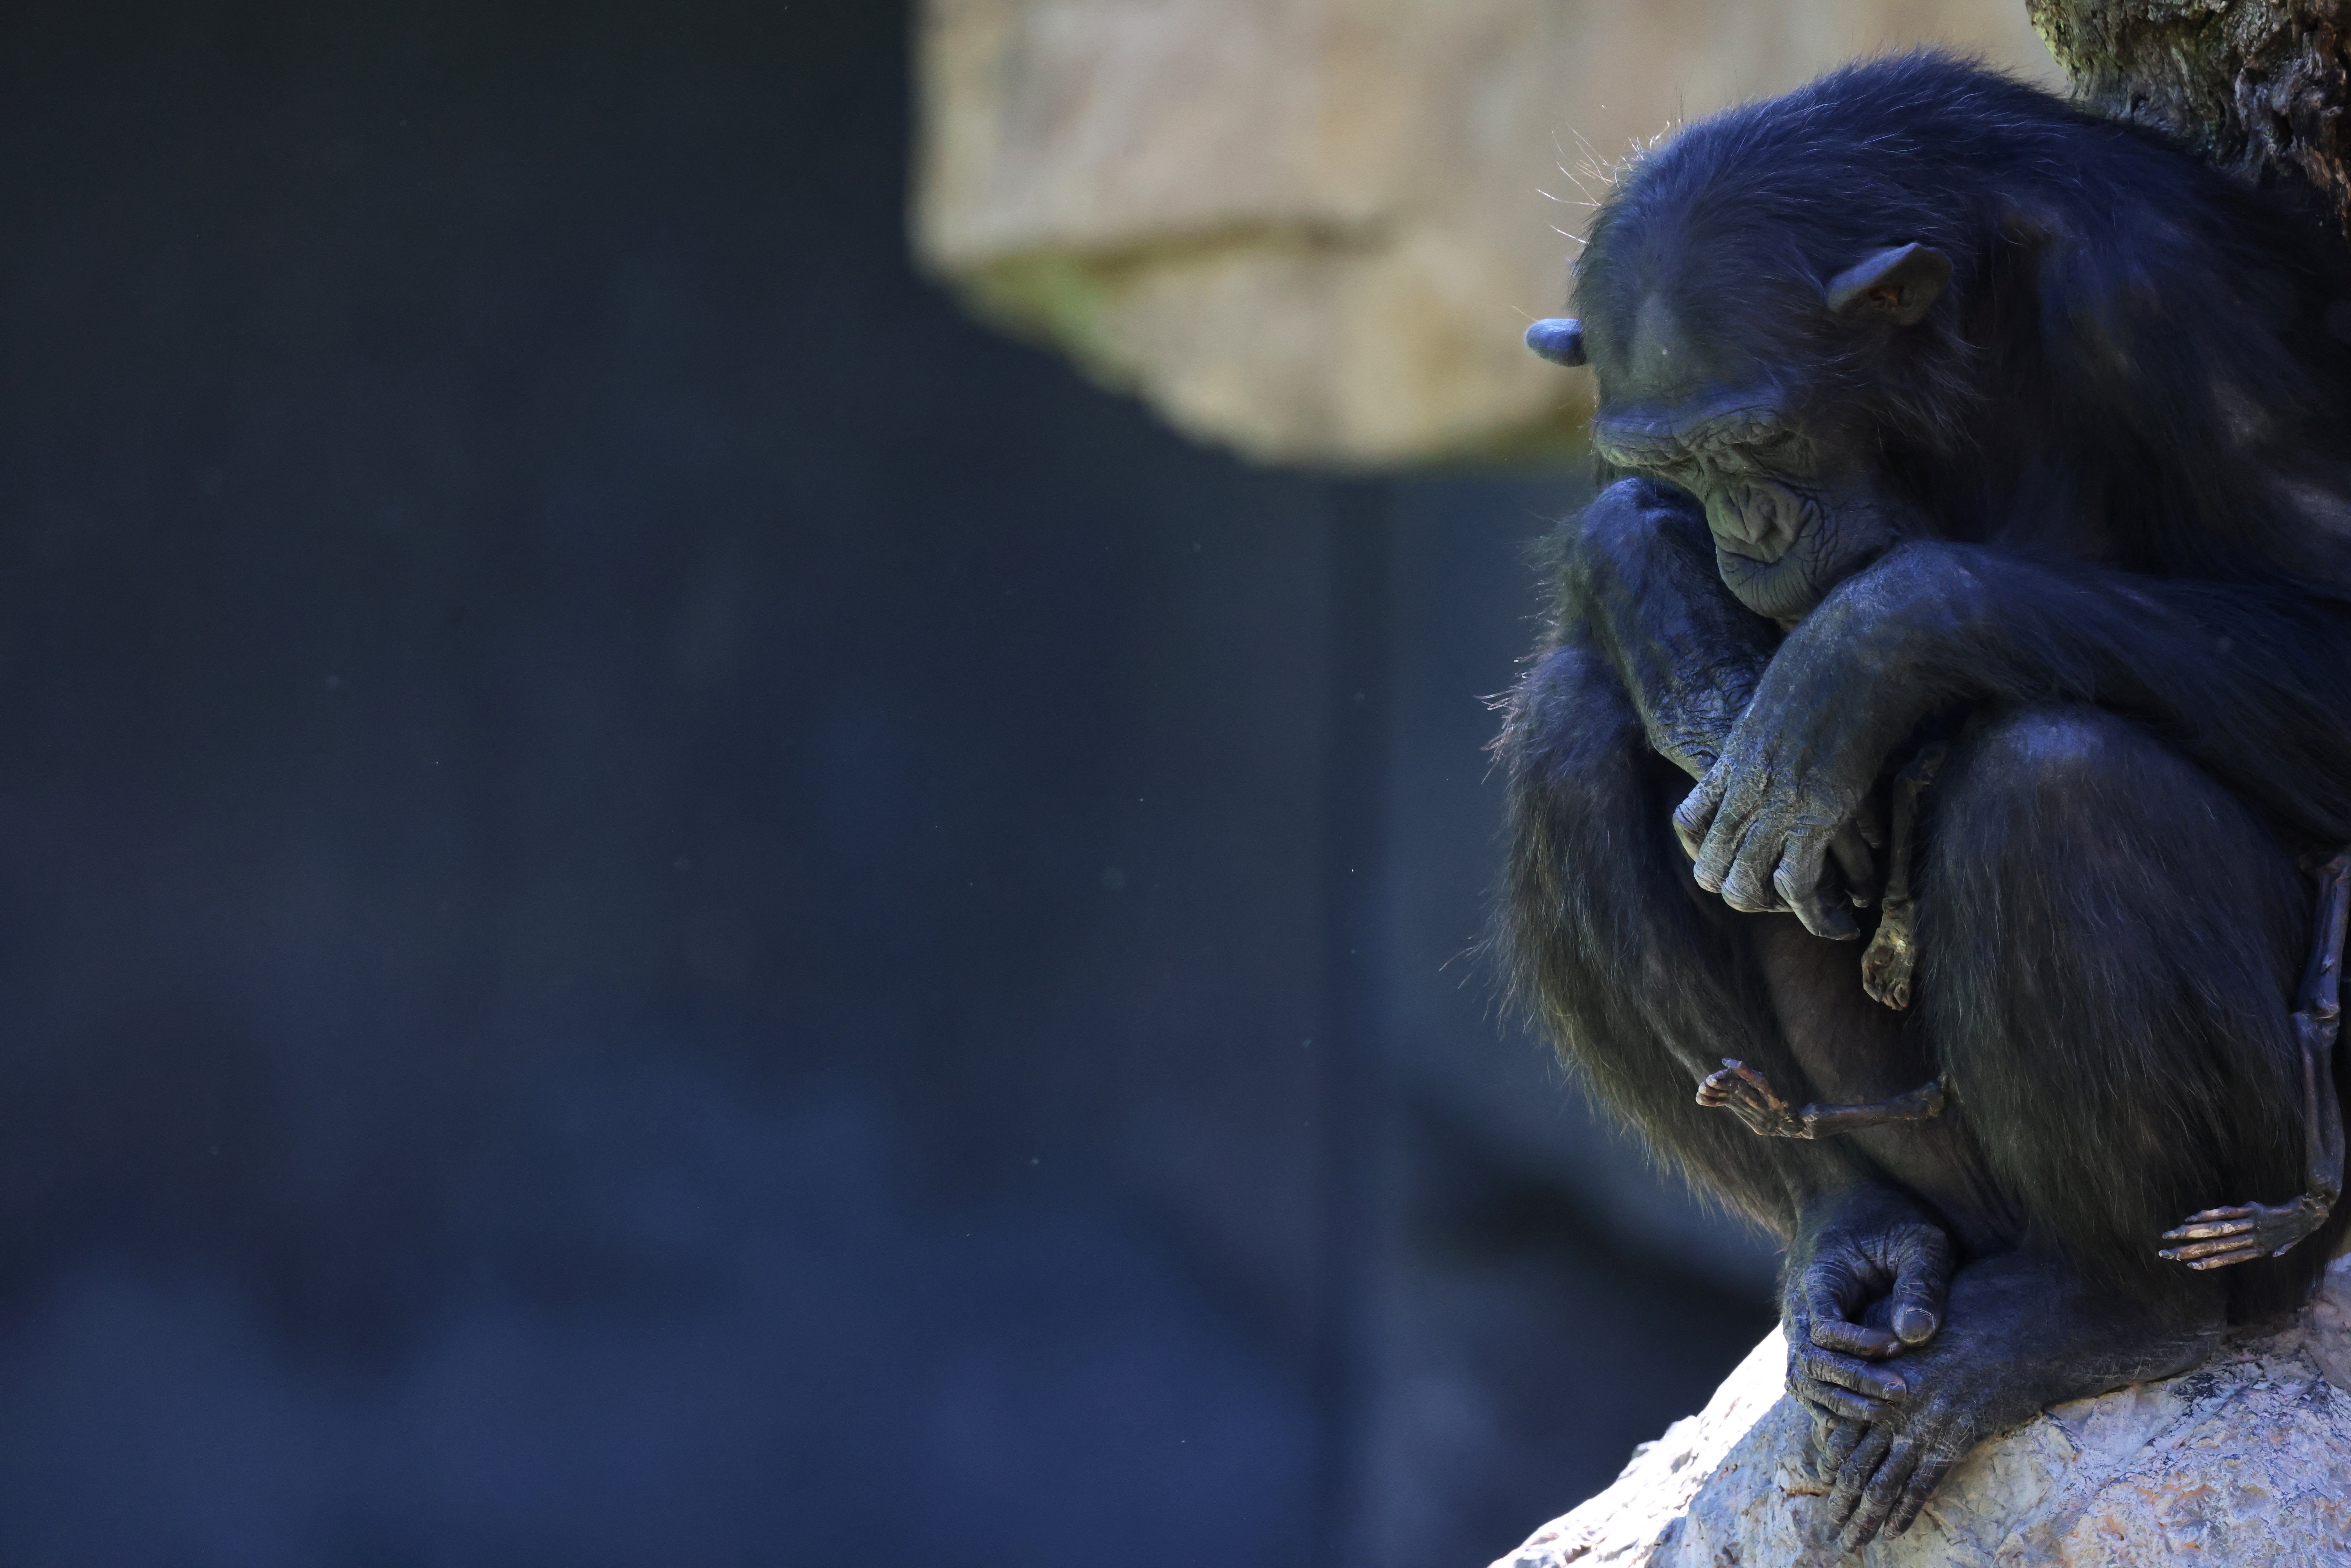 Natalia, a chimpanzee that has carried her dead baby for months, which experts say must be respected and reveals that grieving is not exclusive to humans, looks on as she sits on a rock at Valencia's Bioparc, Spain